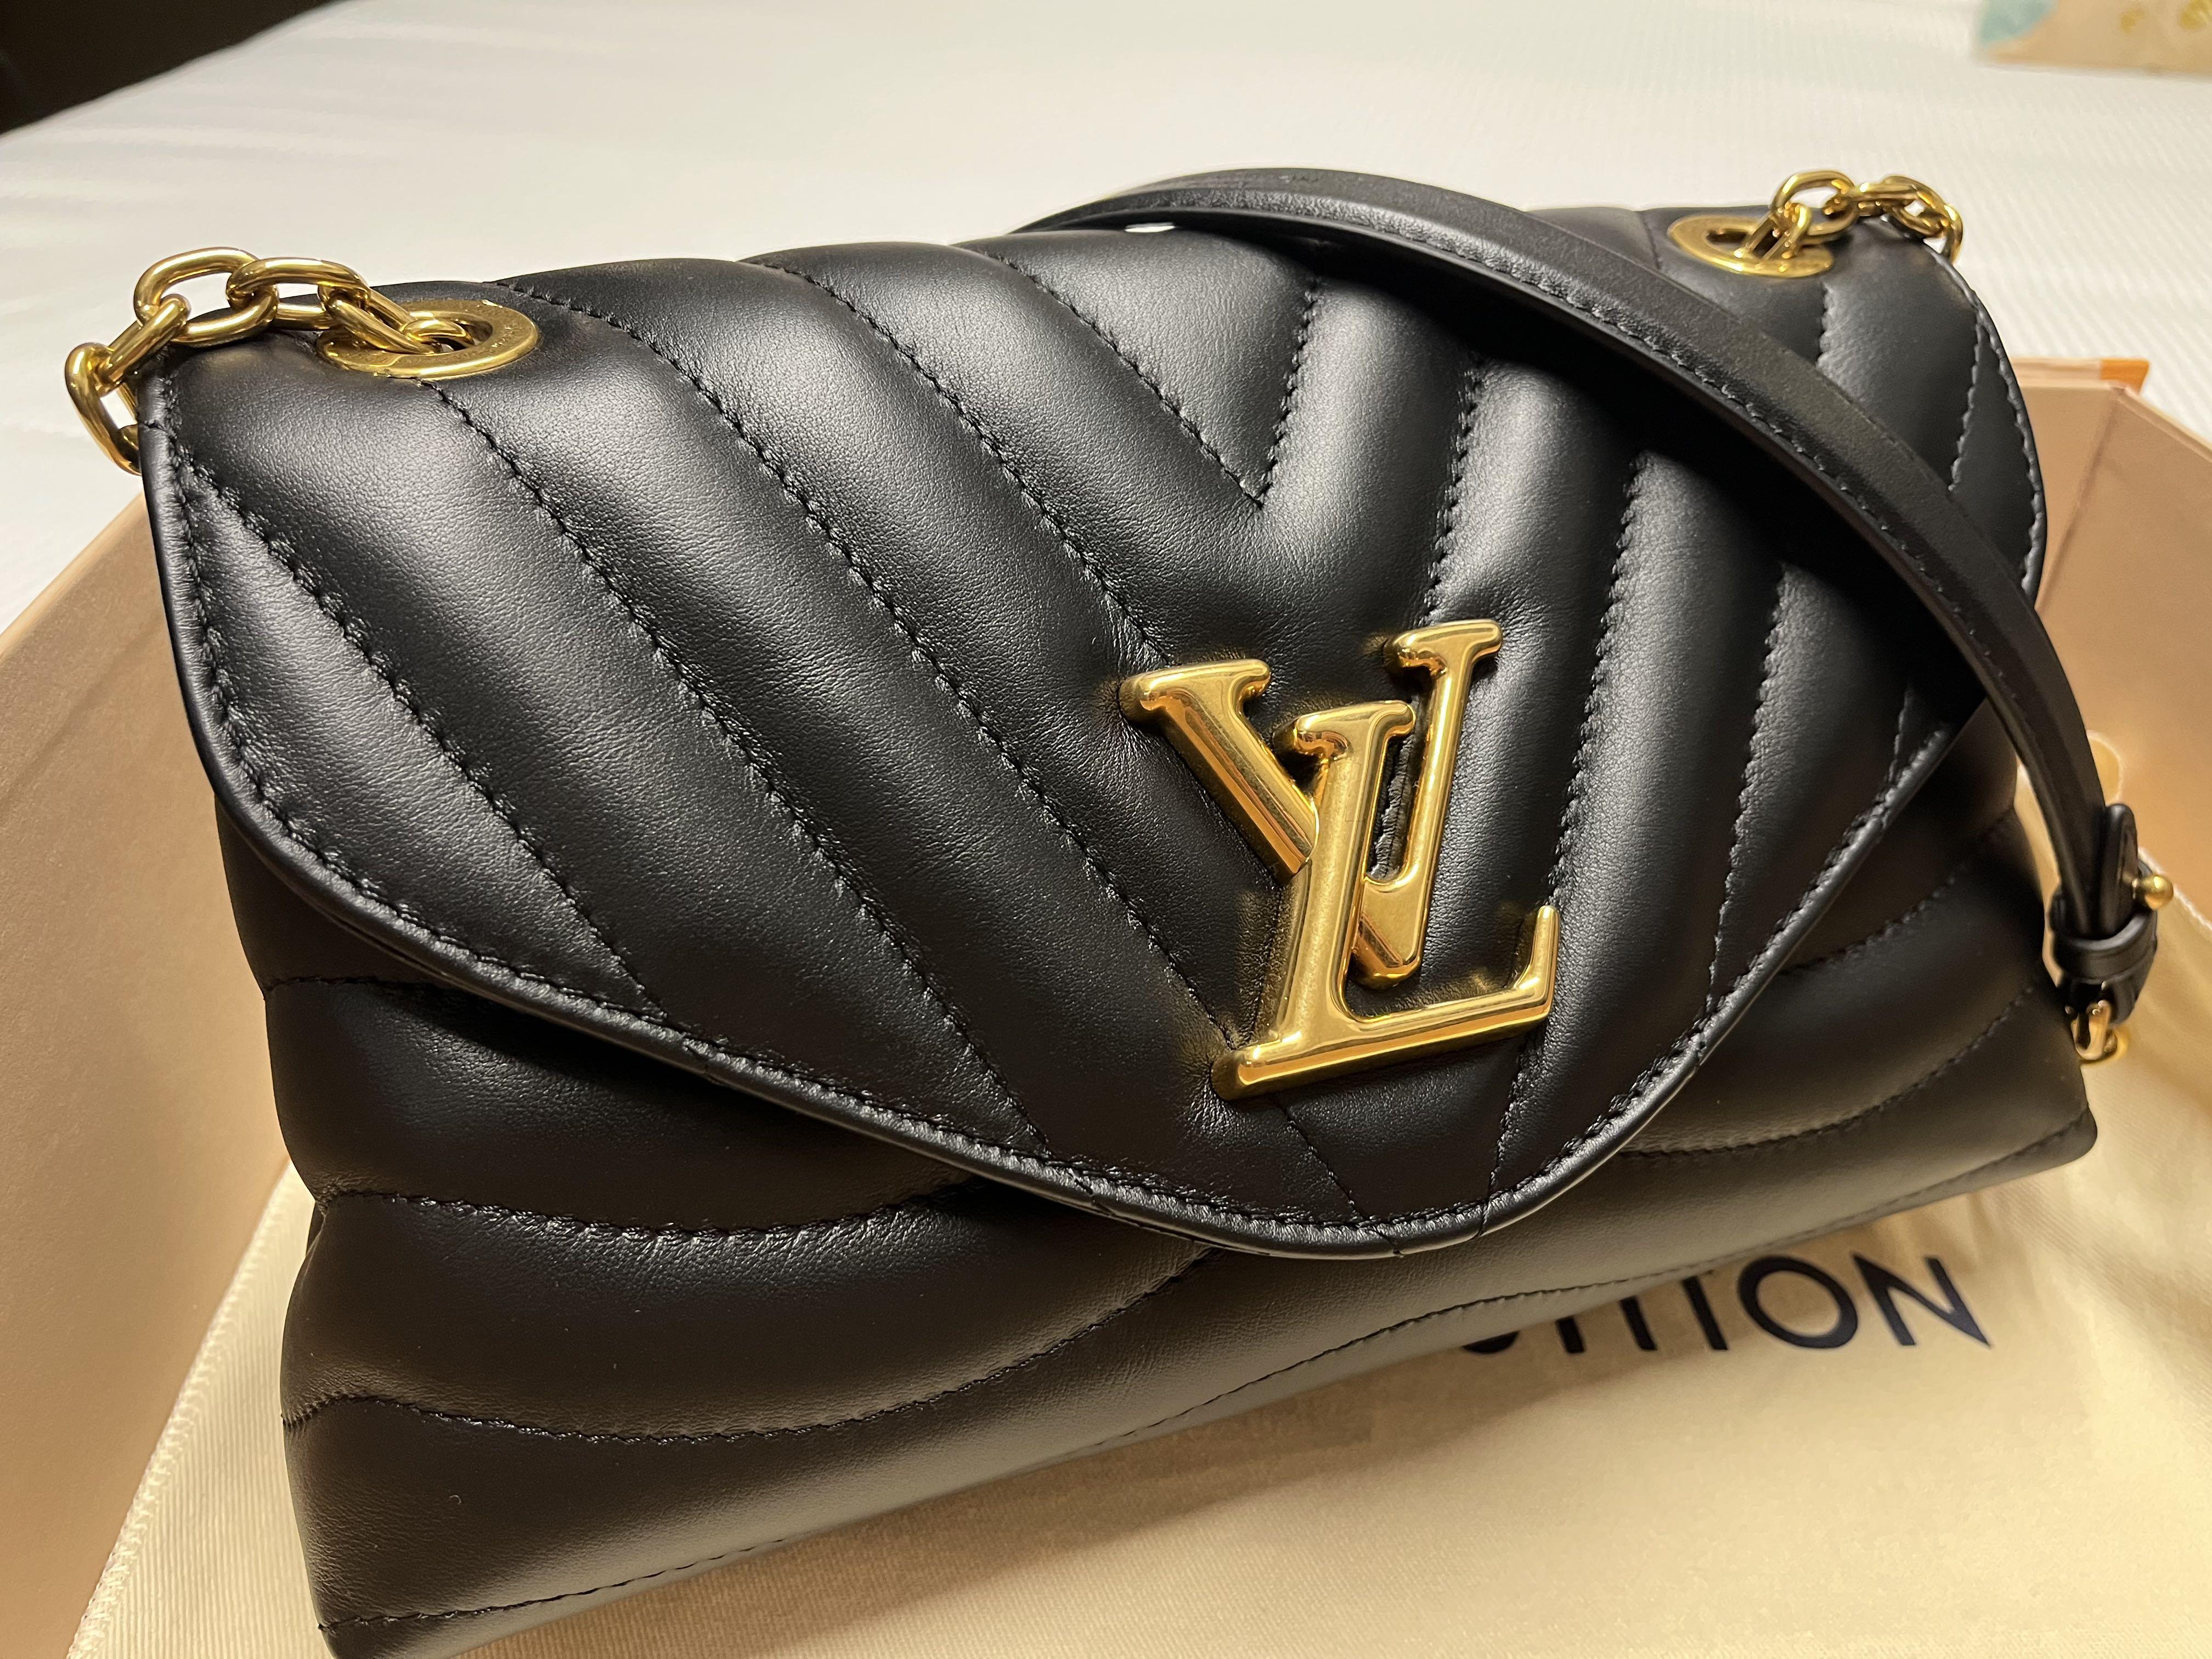 Louis Vuitton New Wave Chain Bag • Cold Brew Vibes